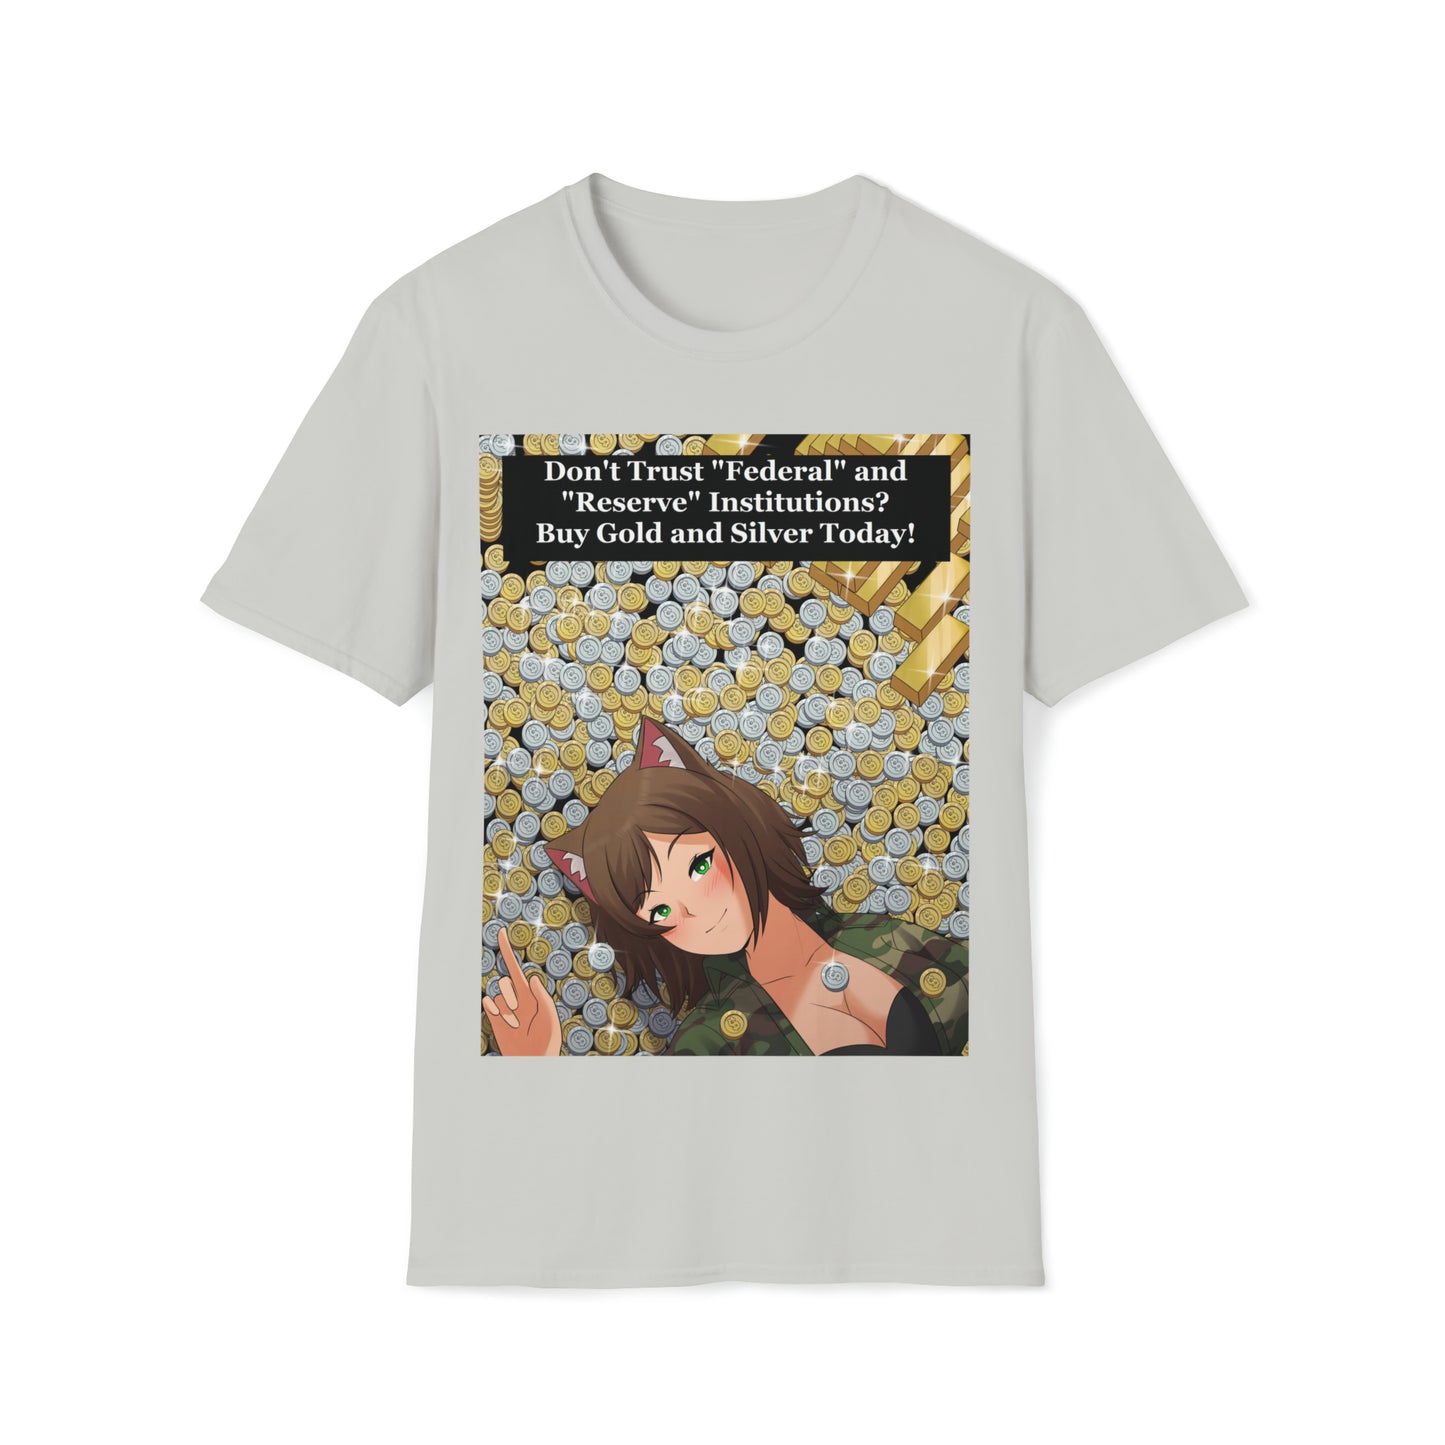 Buy Gold and Silver Shirt